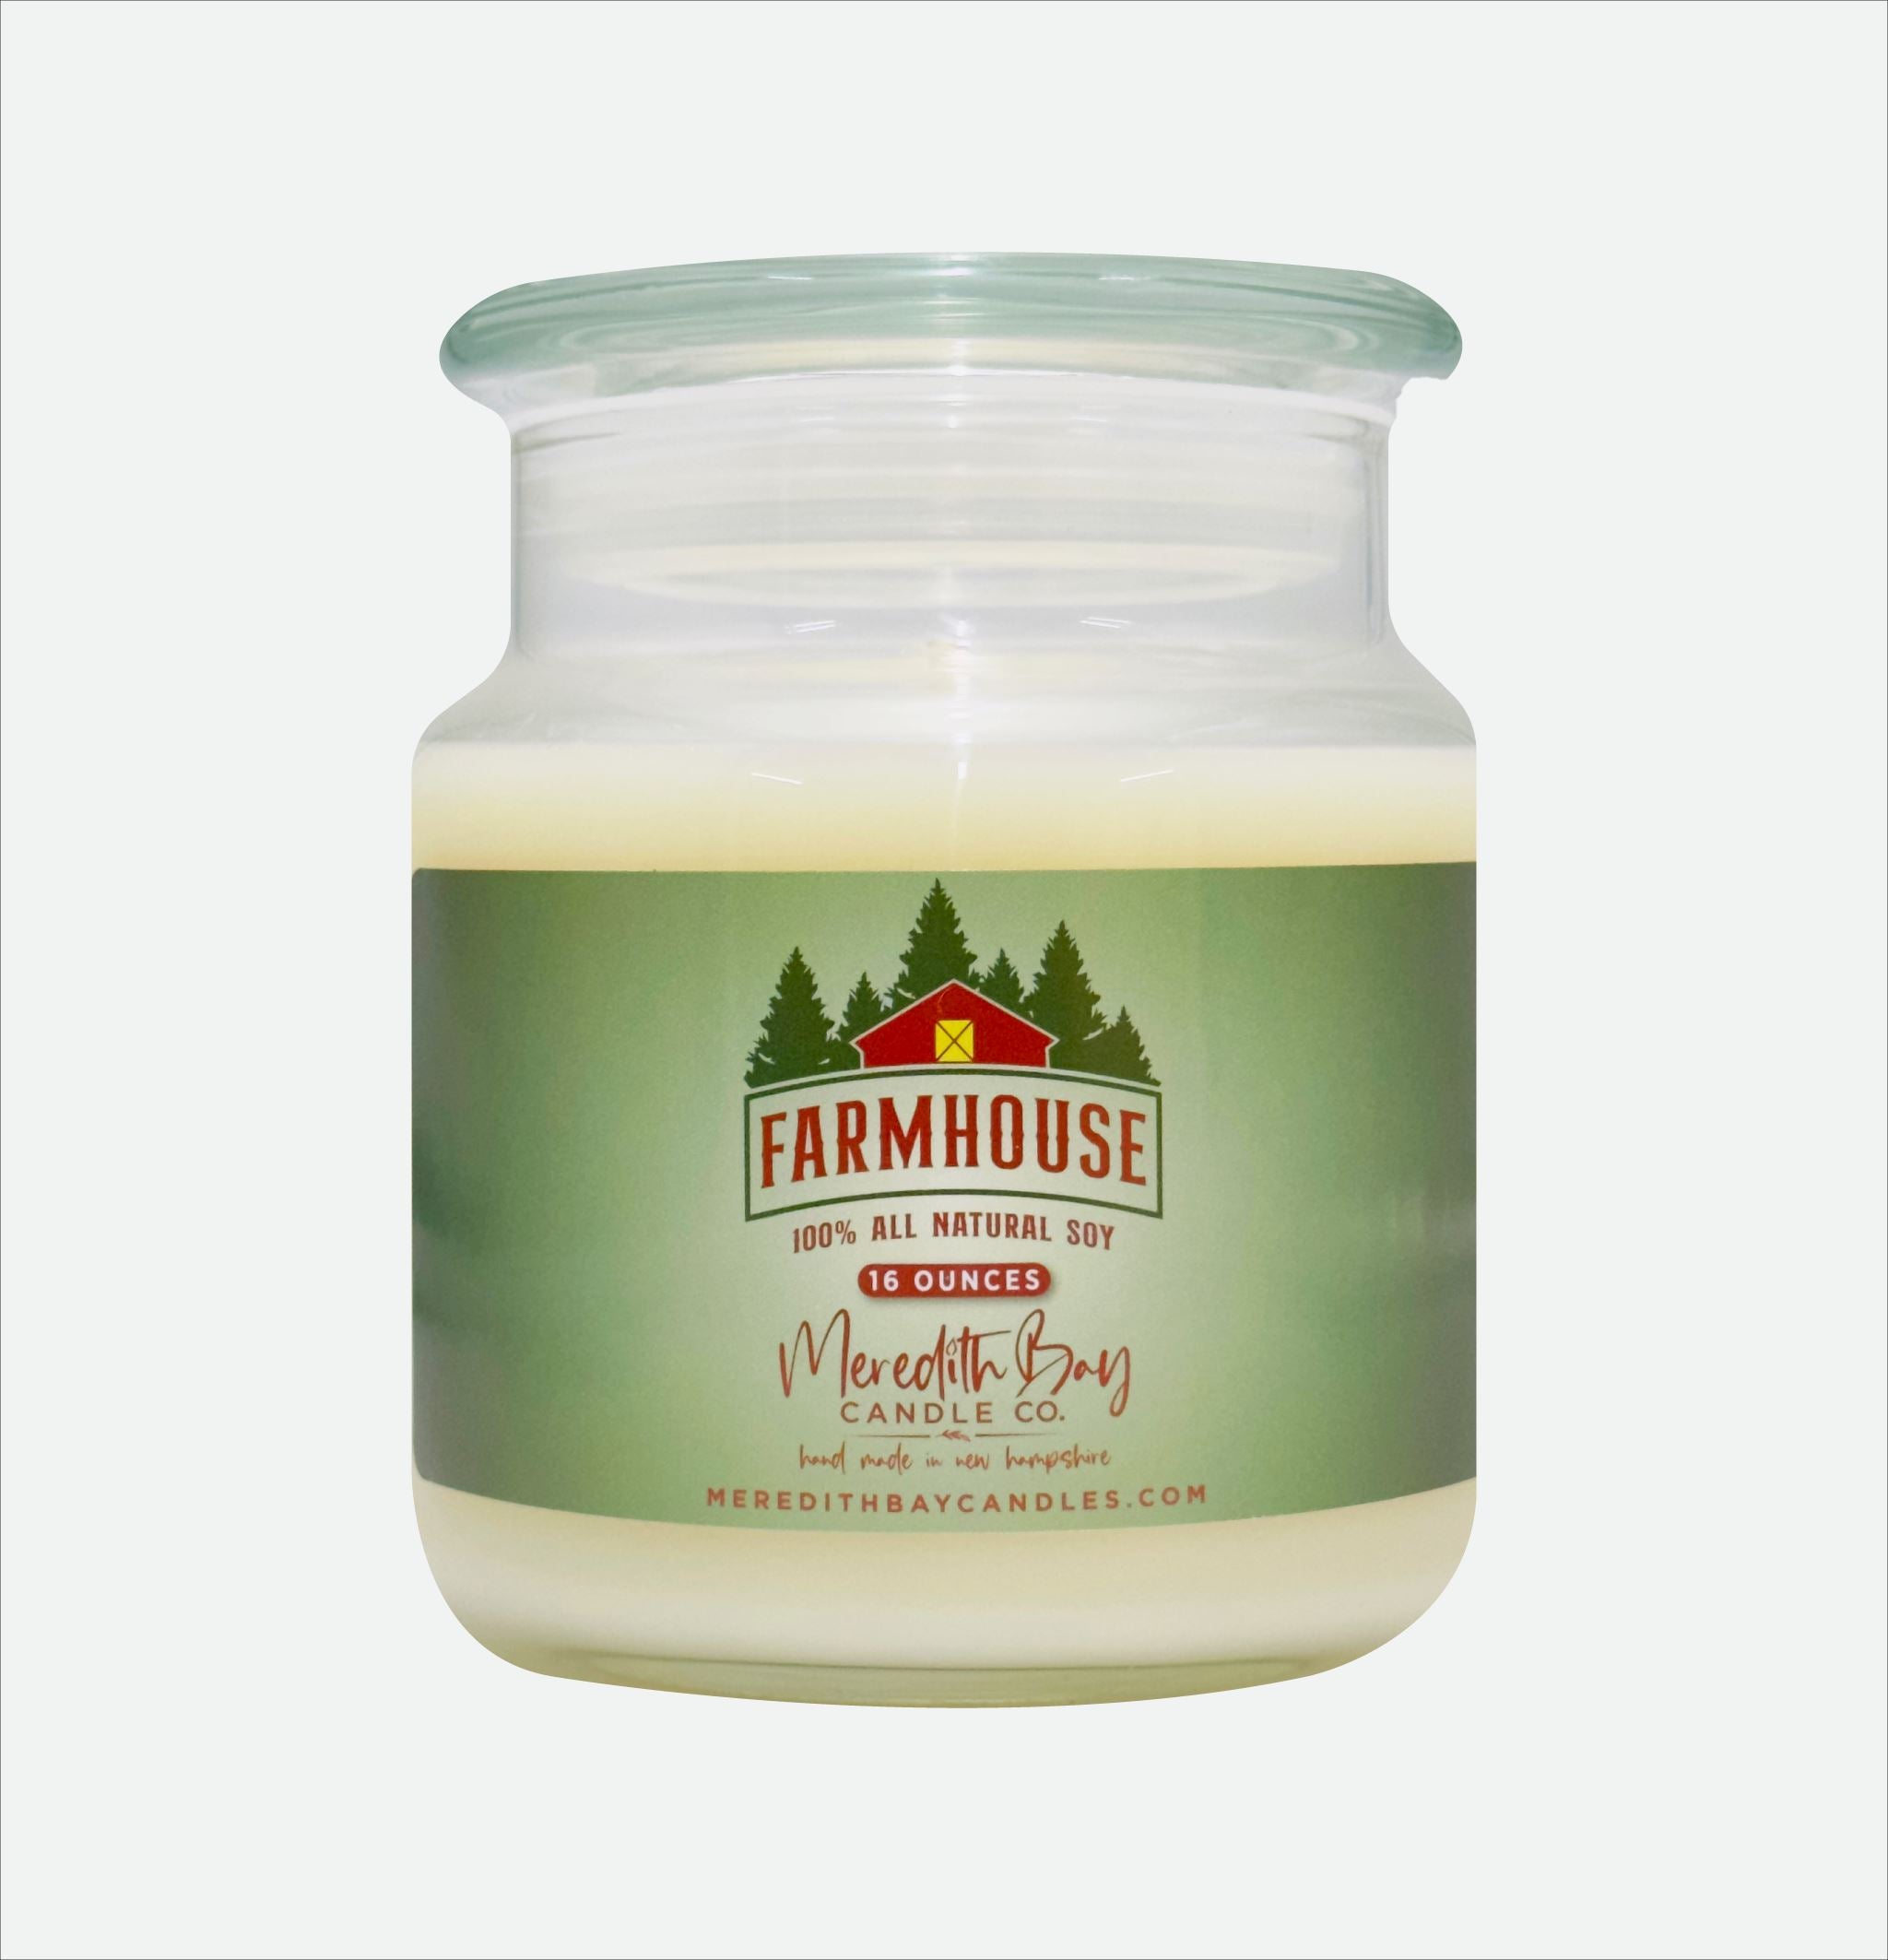 Farmhouse Soy Candle Meredith Bay Candle Co 16 Oz 